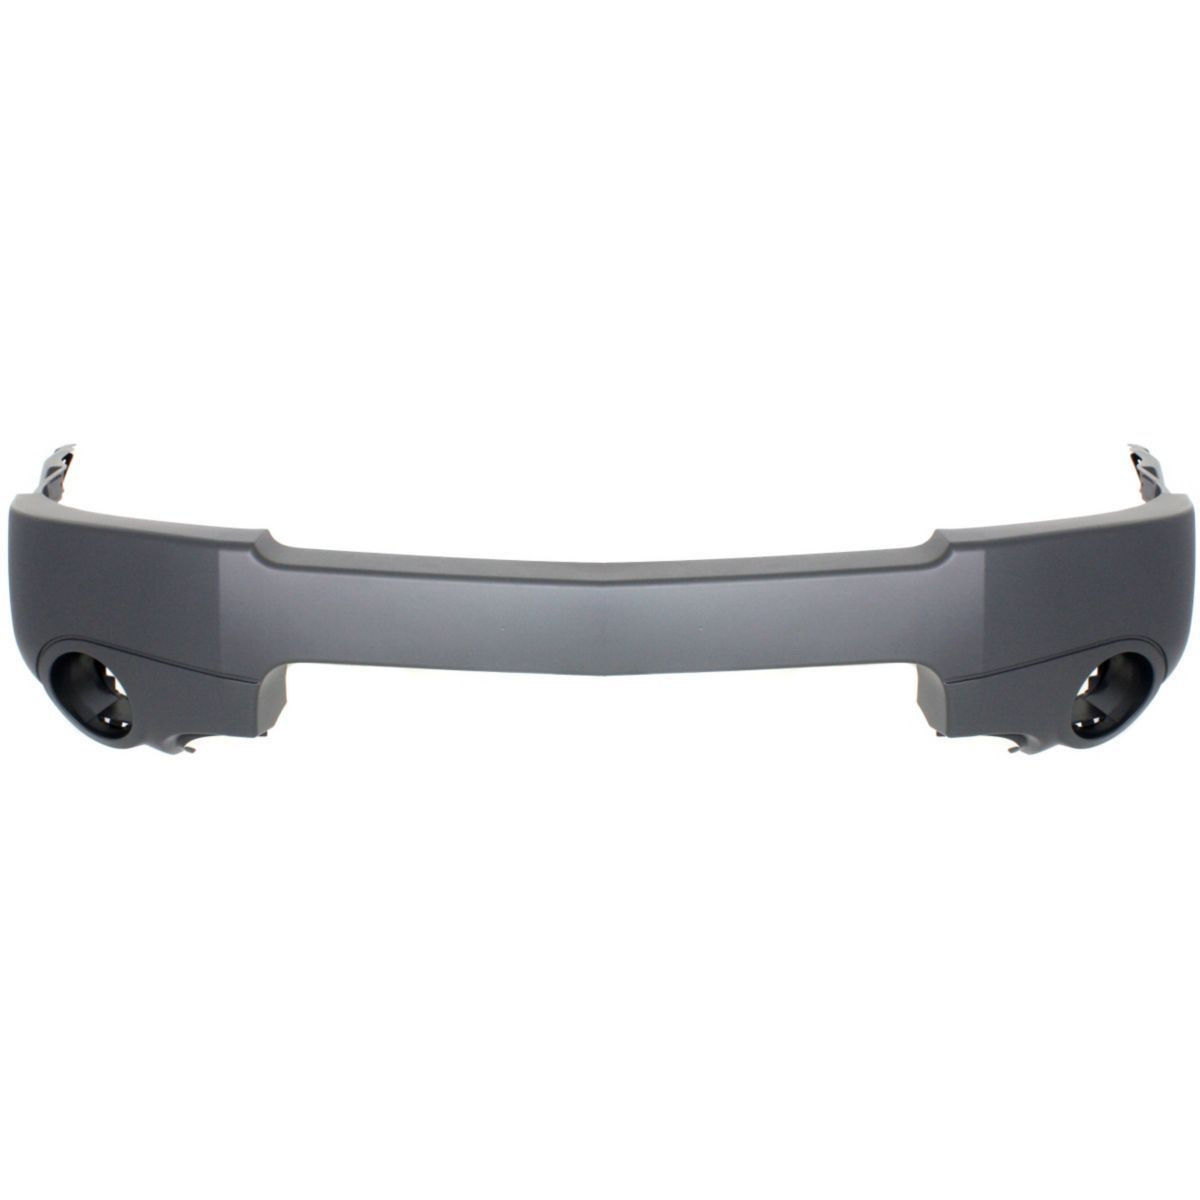 2002-2004 NISSAN XTERRA Front Bumper Cover Painted to Match